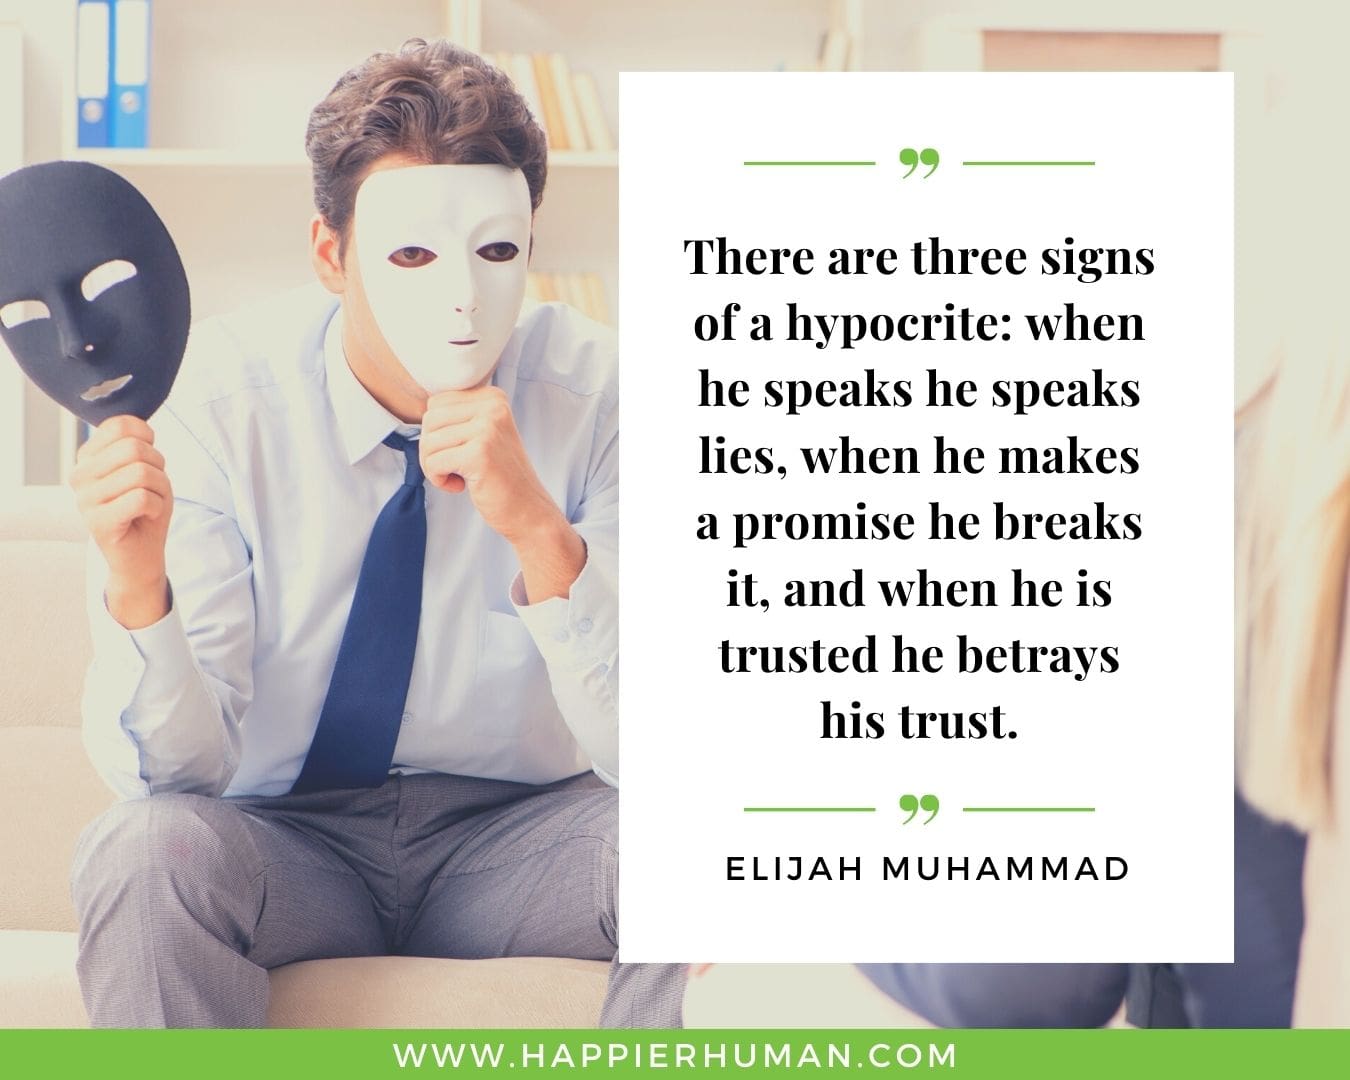 Broken Trust Quotes - “There are three signs of a hypocrite: when he speaks he speaks lies, when he makes a promise he breaks it, and when he is trusted he betrays his trust.” - Elijah Muhammad